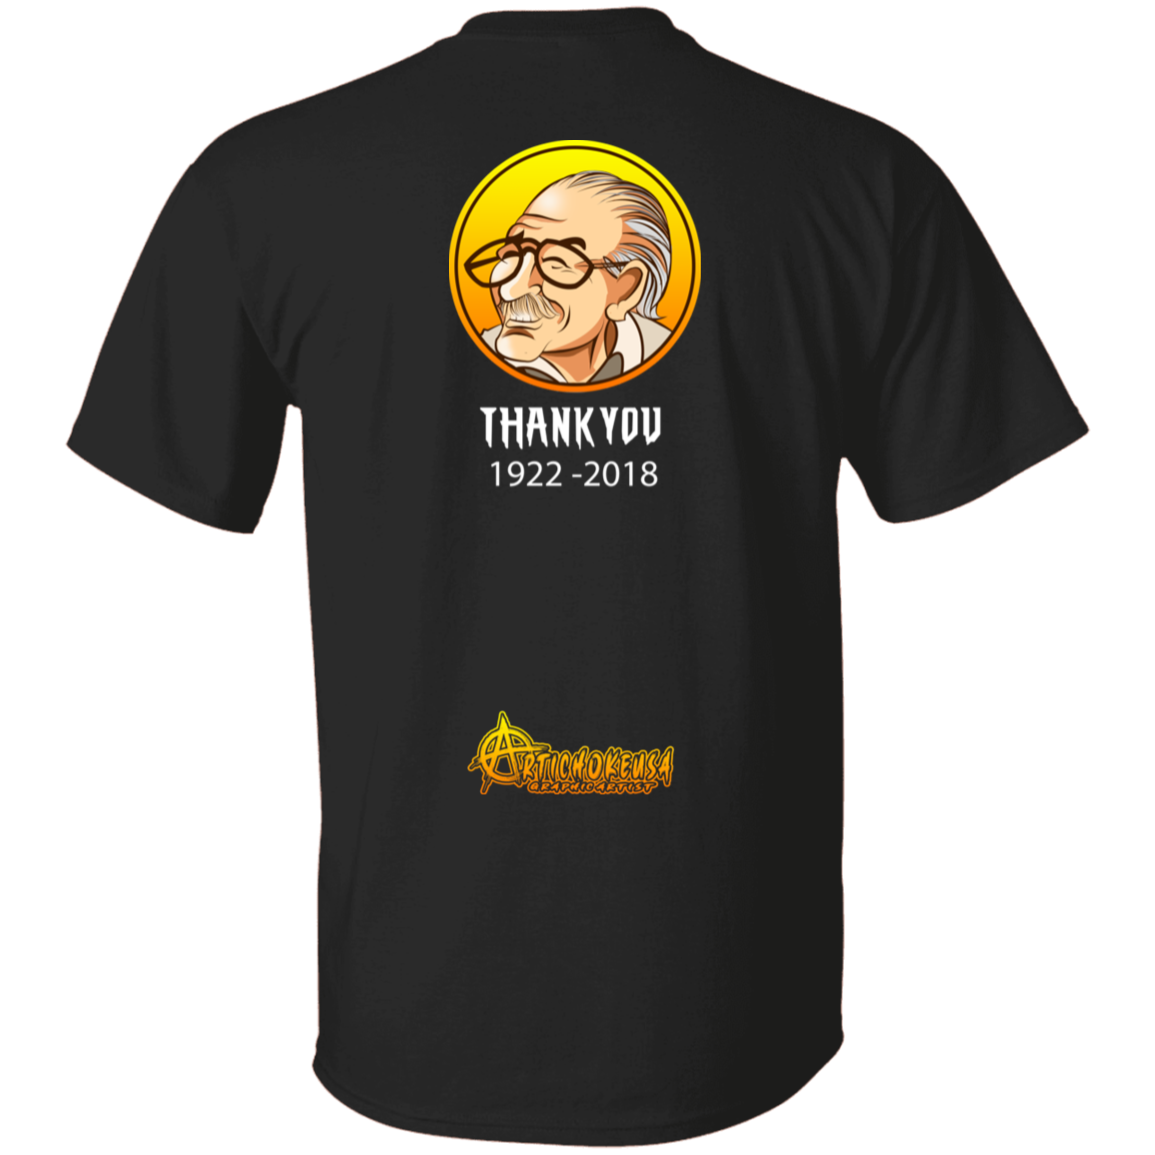 ArtichokeUSA Character and Font design. Stan Lee Thank You Fan Art. Let's Create Your Own Design Today. 100% Cotton T-Shirt